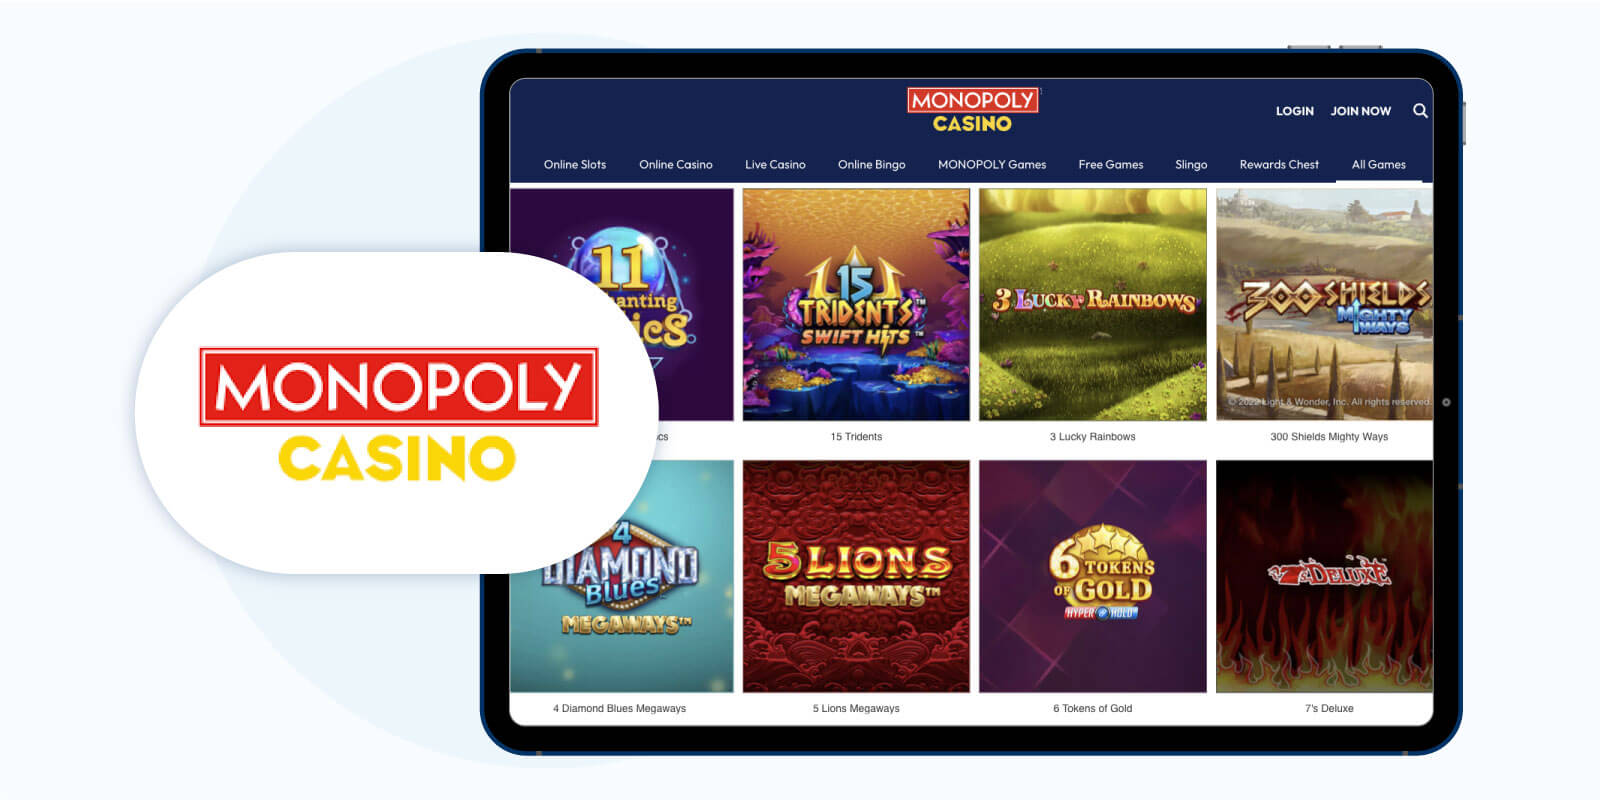 Monopoly Casino - Top-Tier Play'n Go Casino For No Wagering Offers